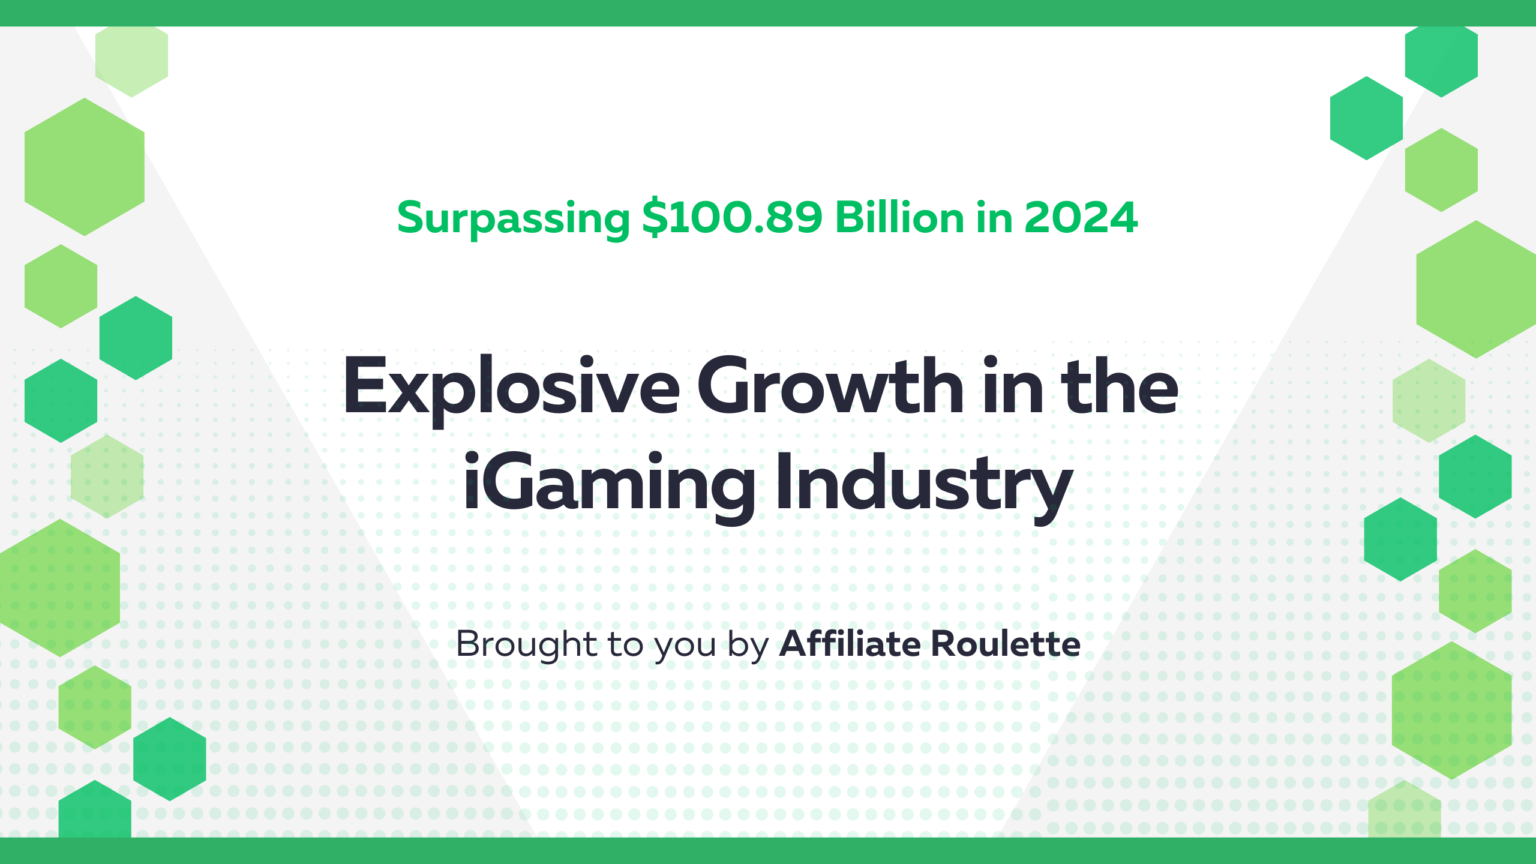 Explosive Growth in the iGaming Industry: Surpassing $100.89 Billion in 2024